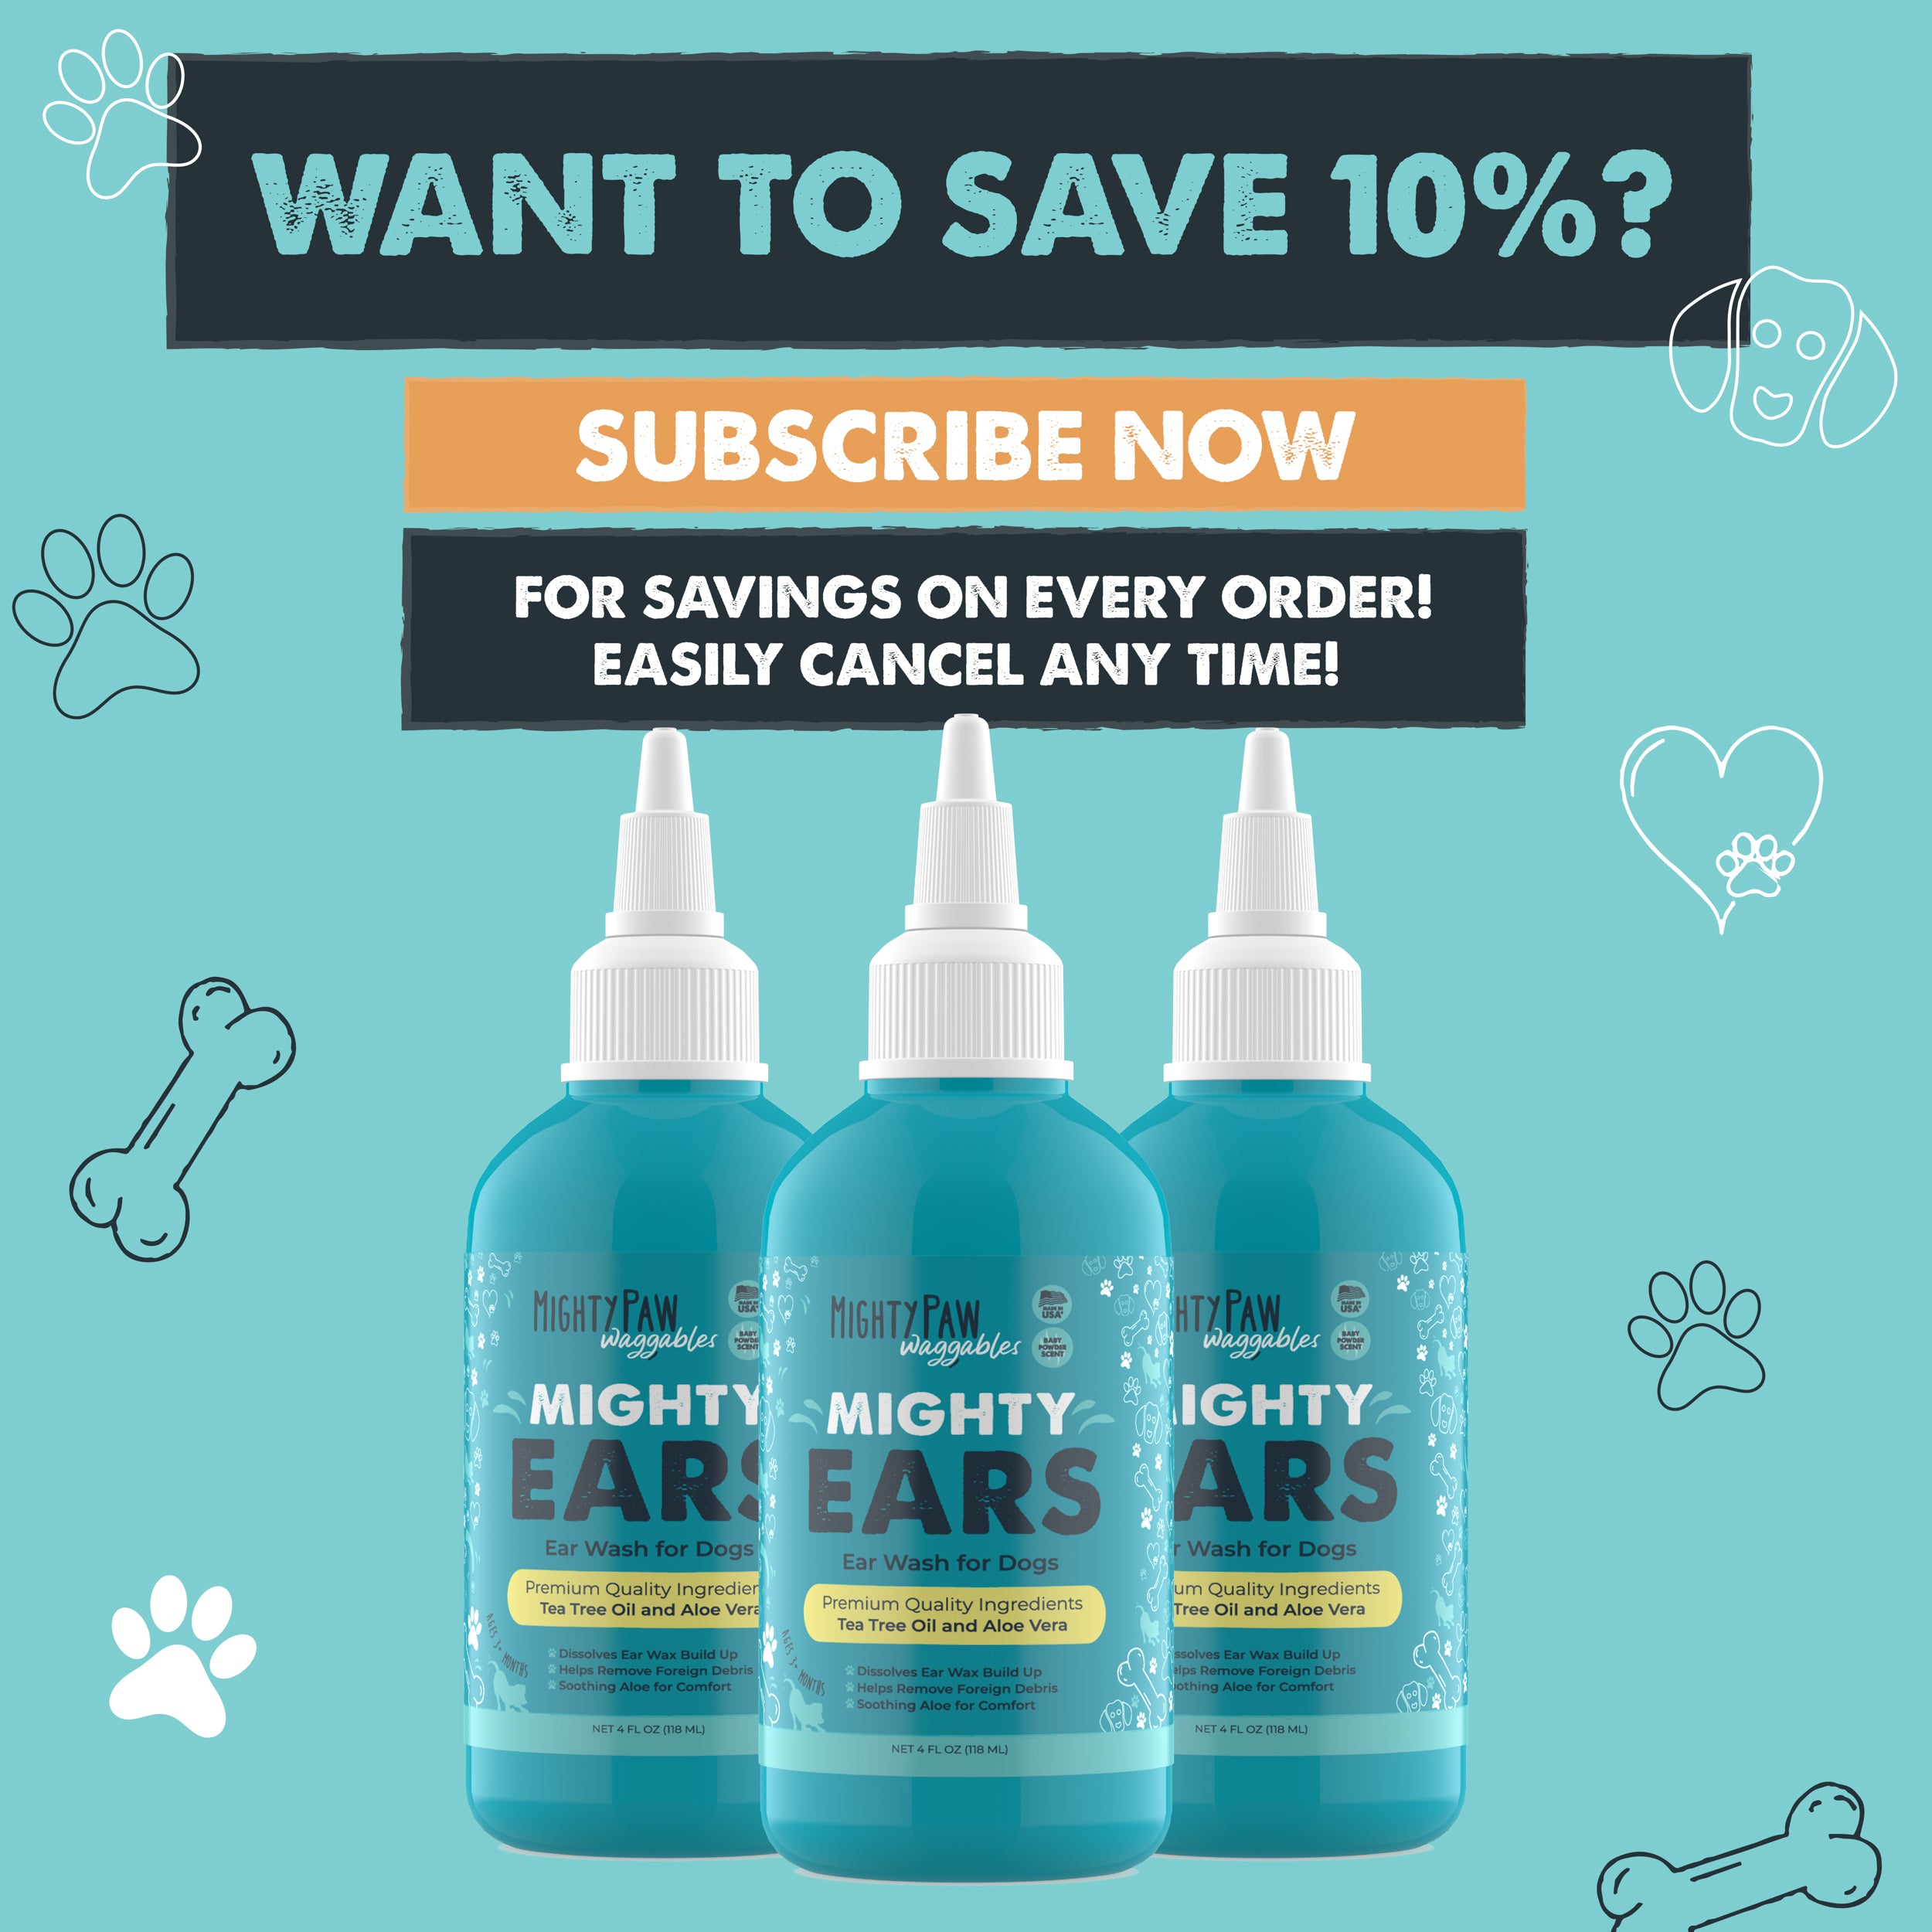 Mighty Ears Ear Wash: Gentle and Soothing Ear Cleaner for Dogs